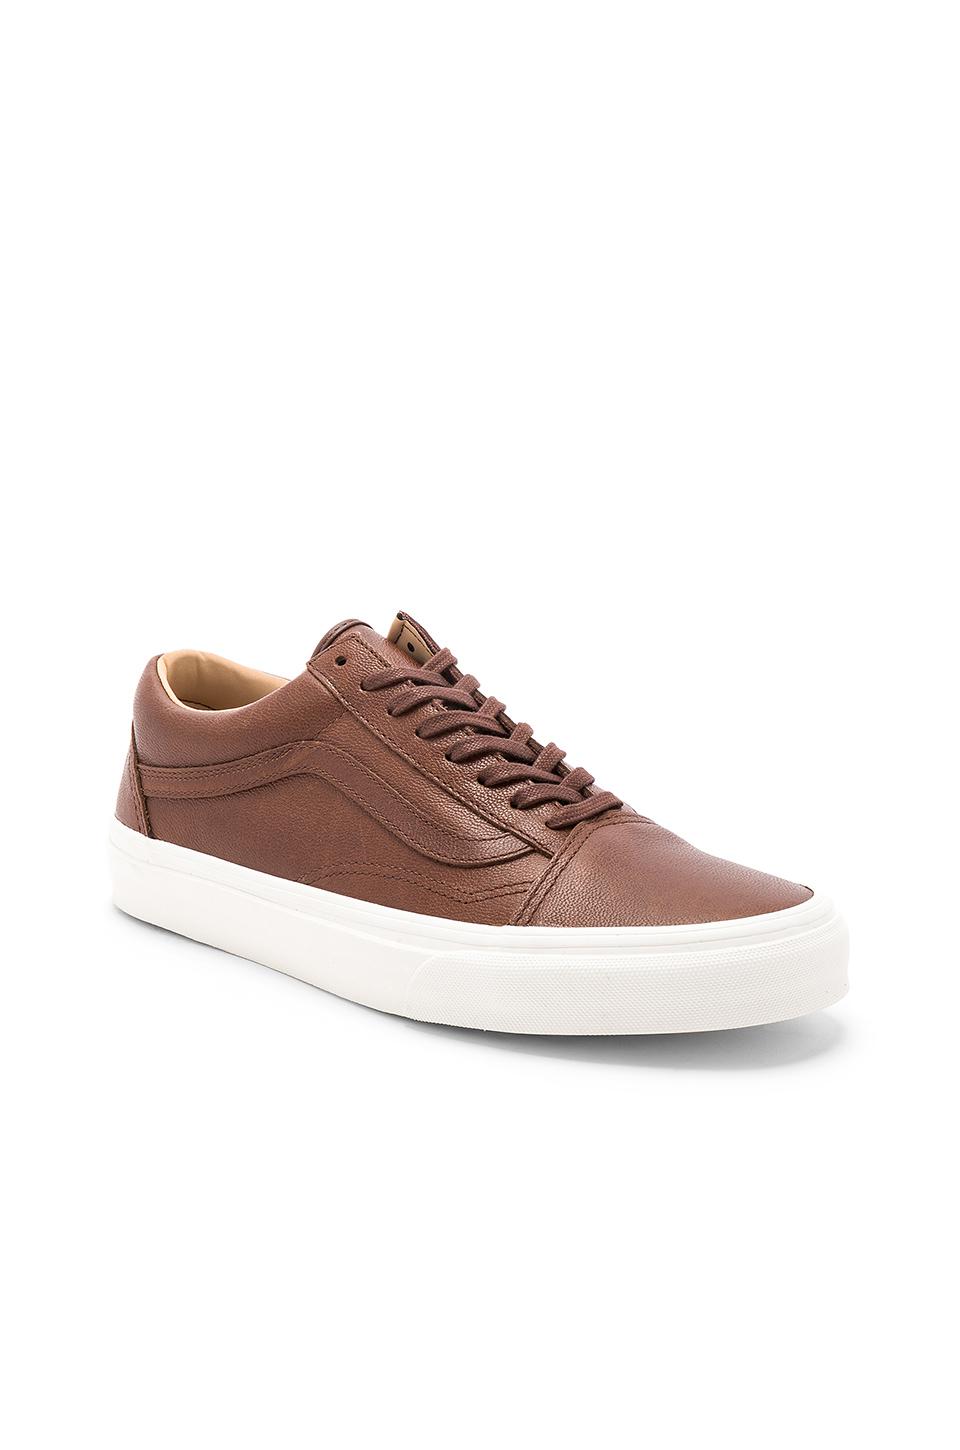 vans leather brown shoes